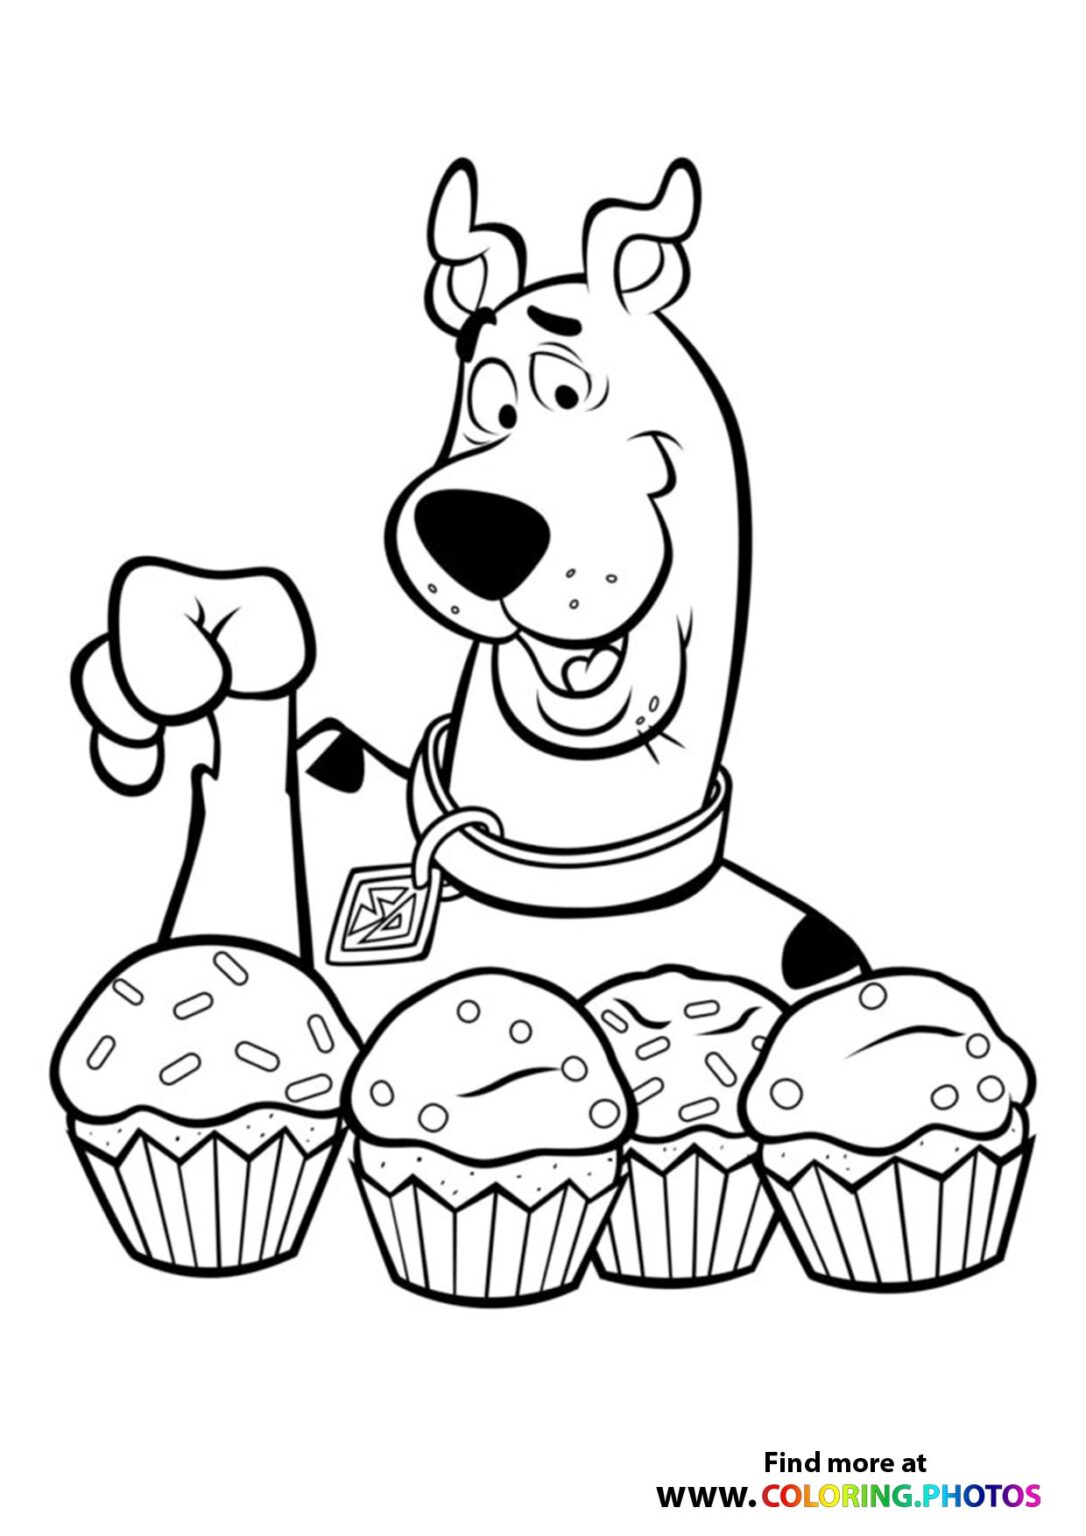 Bluey Muffin - Coloring Pages for kids